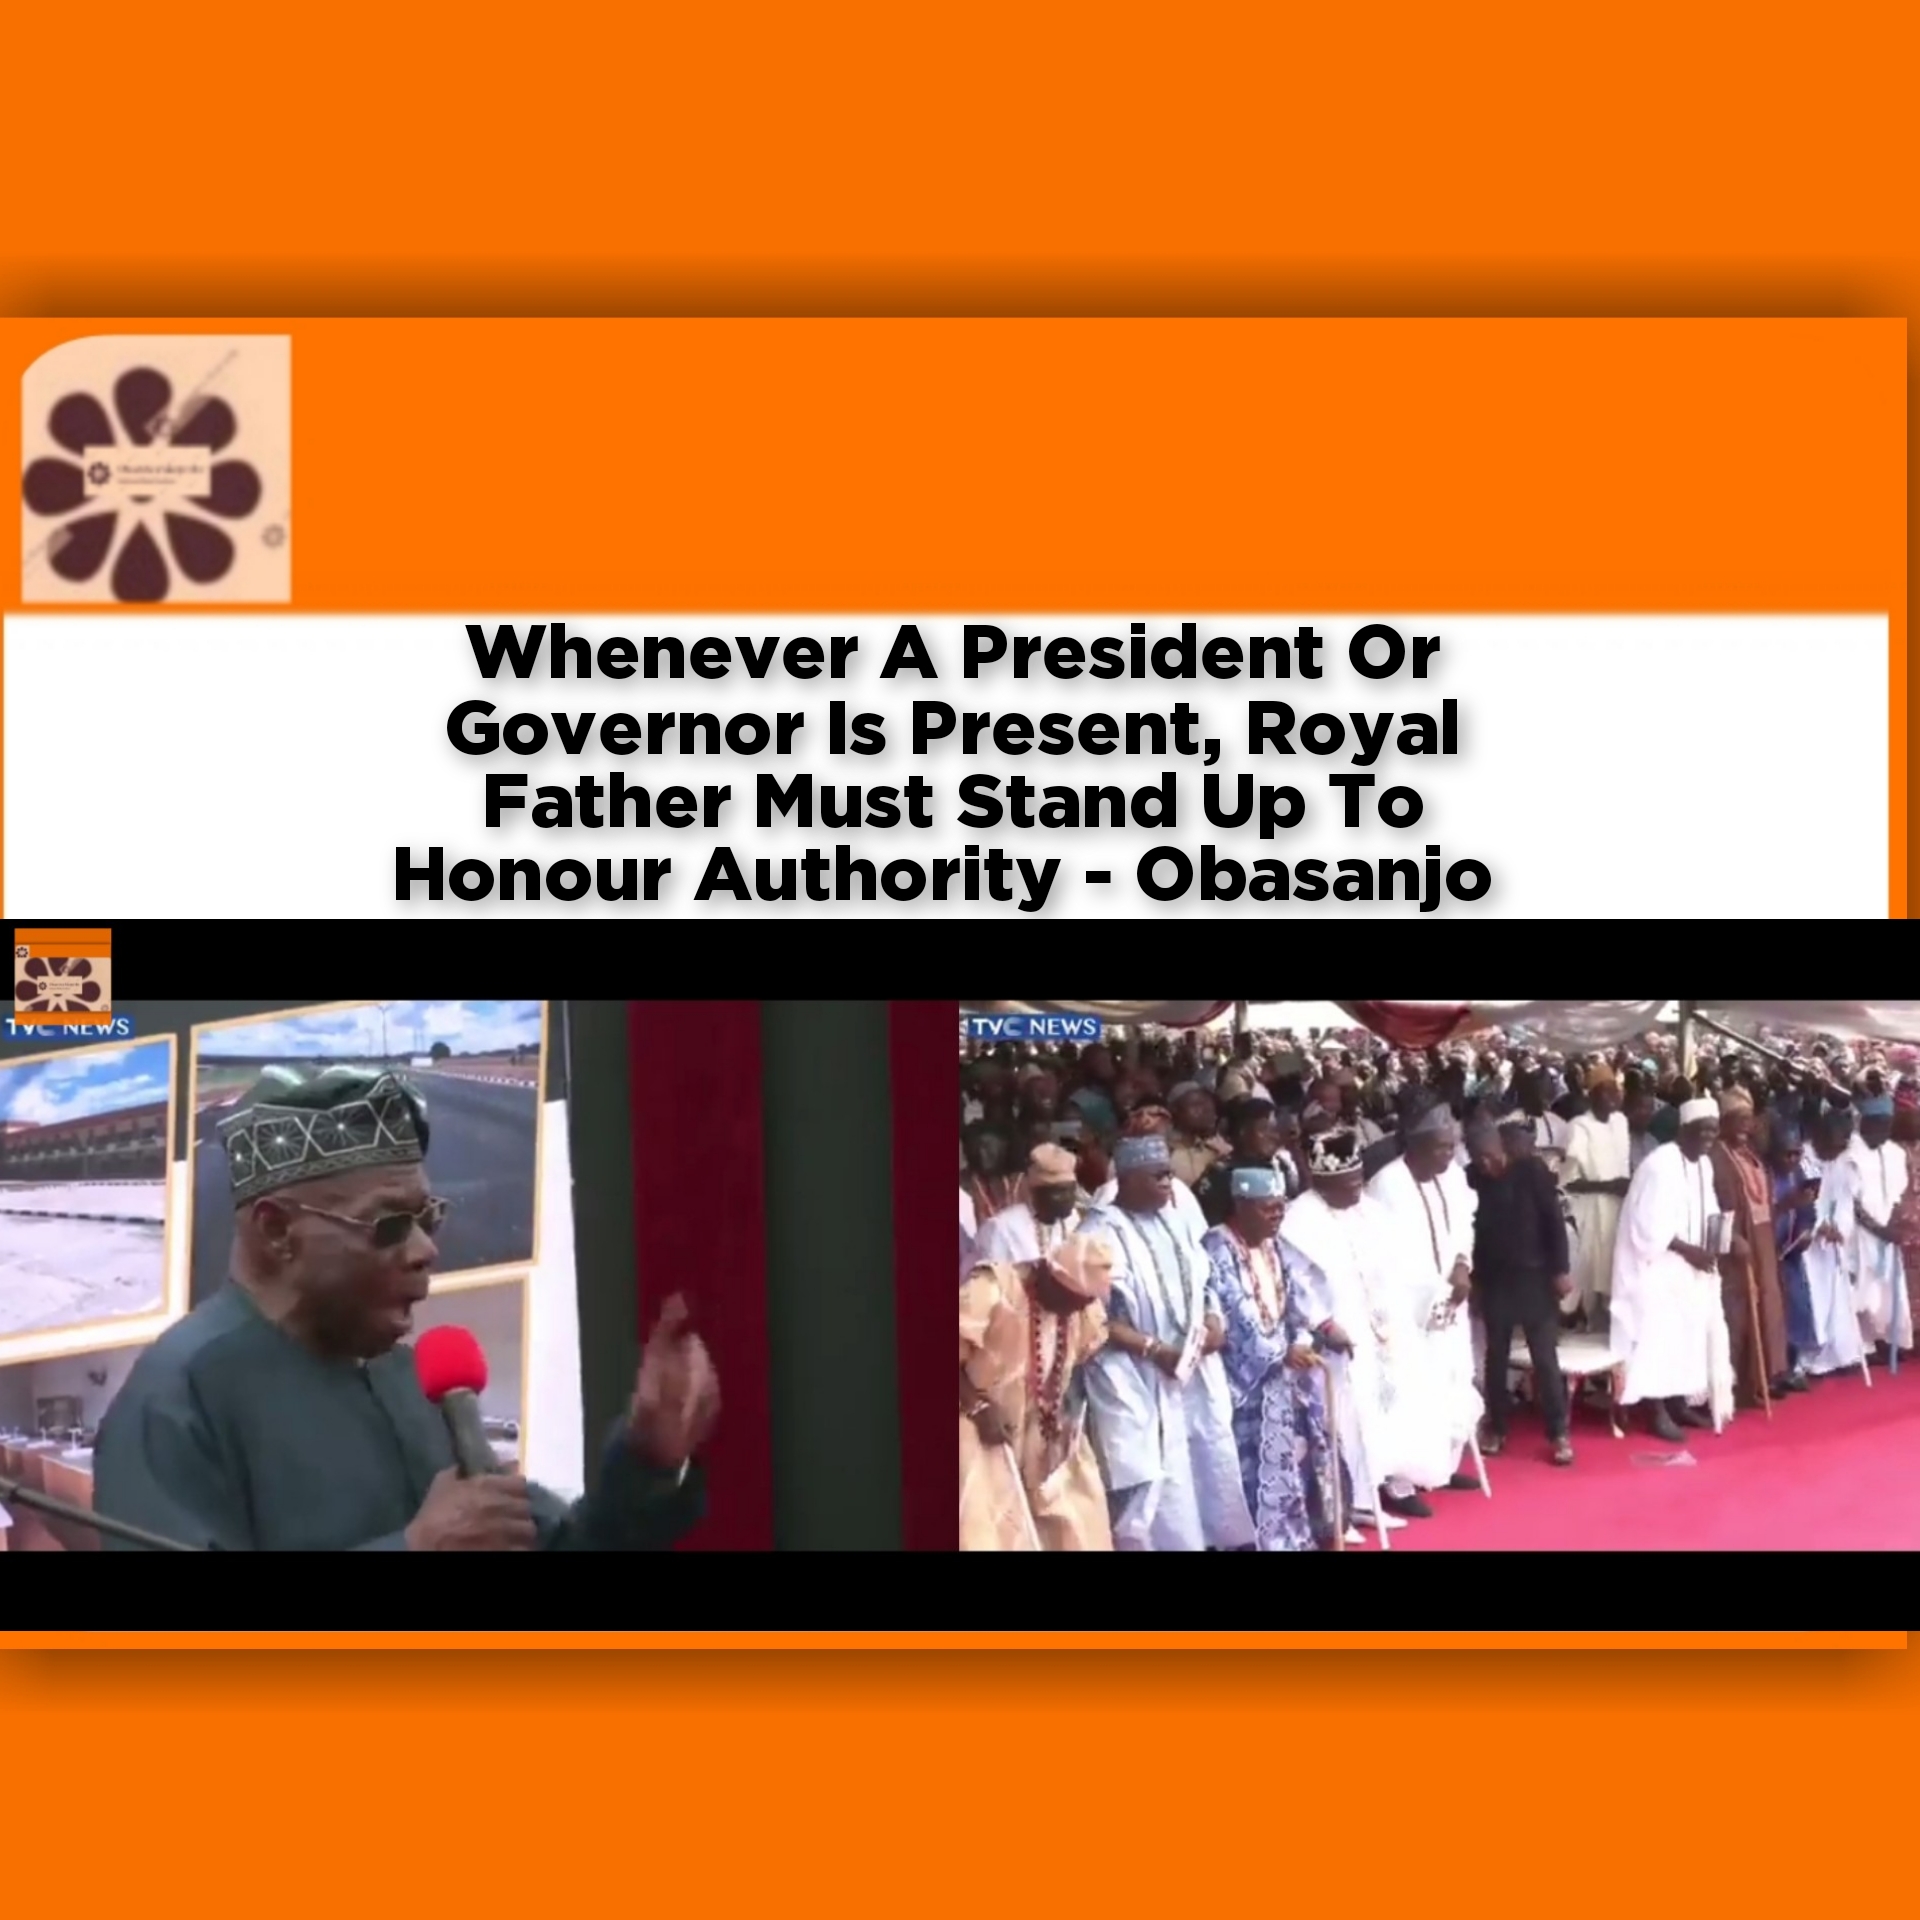 Whenever A President Or Governor Is Present, Royal Father Must Stand Up To Honour Authority - Obasanjo ~ OsazuwaAkonedo #Igp